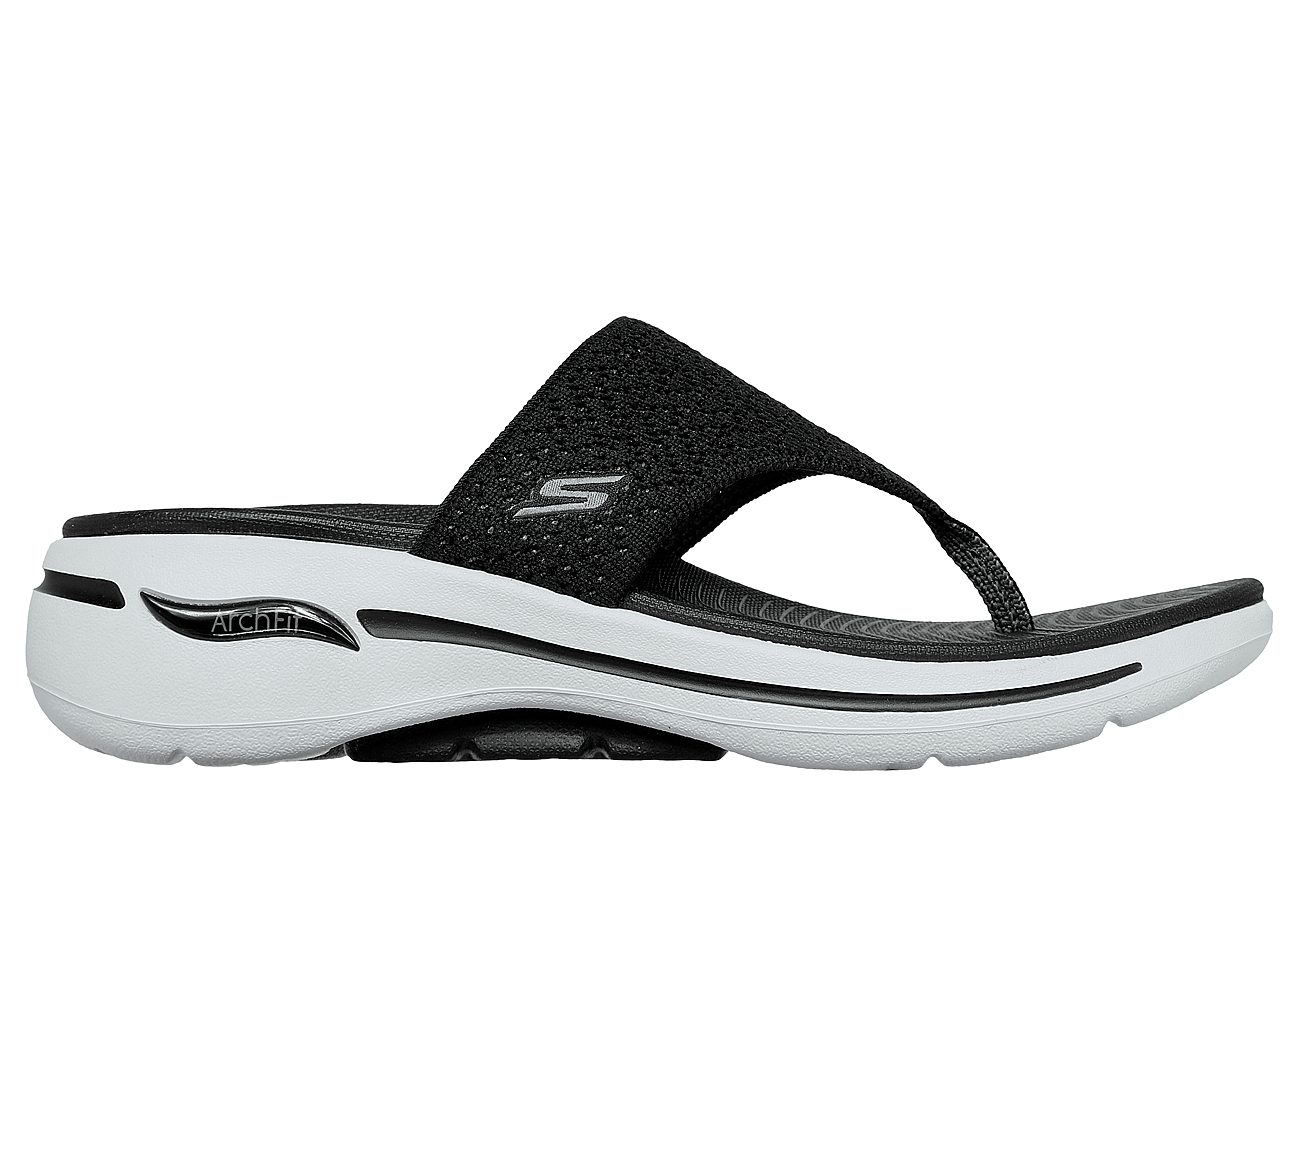 GO WALK ARCH FIT SANDAL - WEE, BLACK/WHITE Footwear Right View